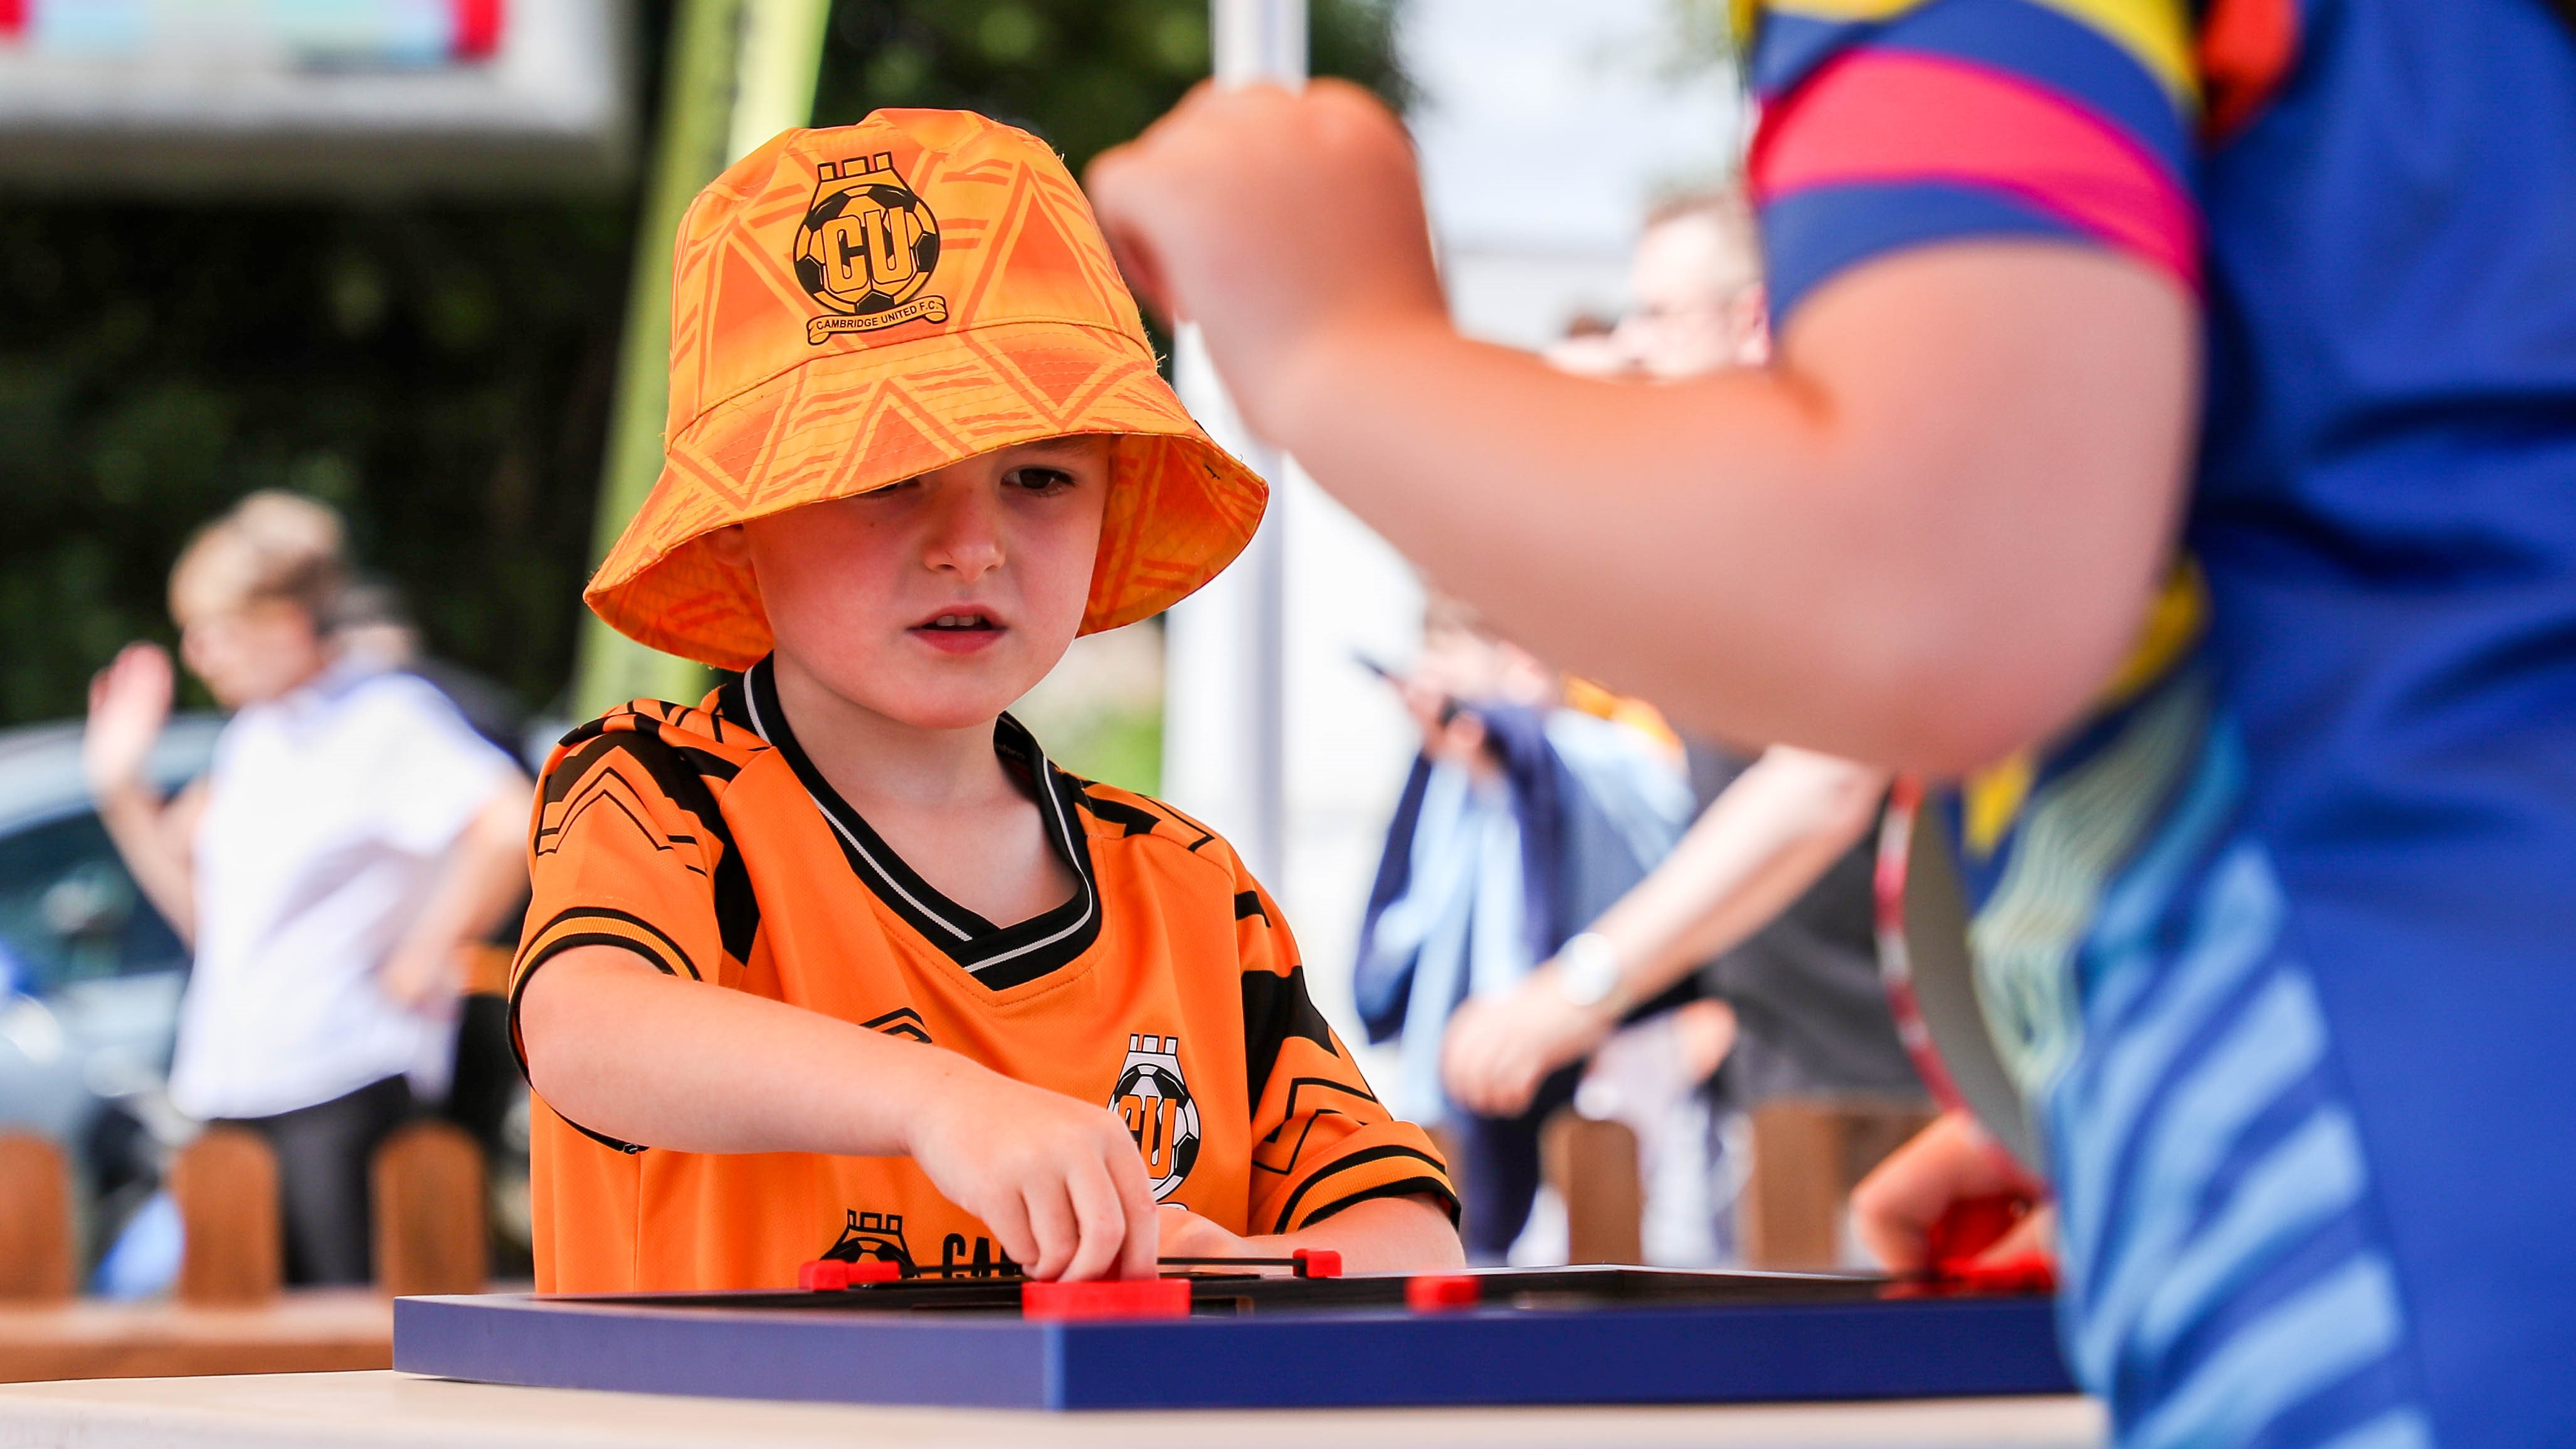 A young supporter playing in the Kids' Zone at the Cledara Abbey Stadium